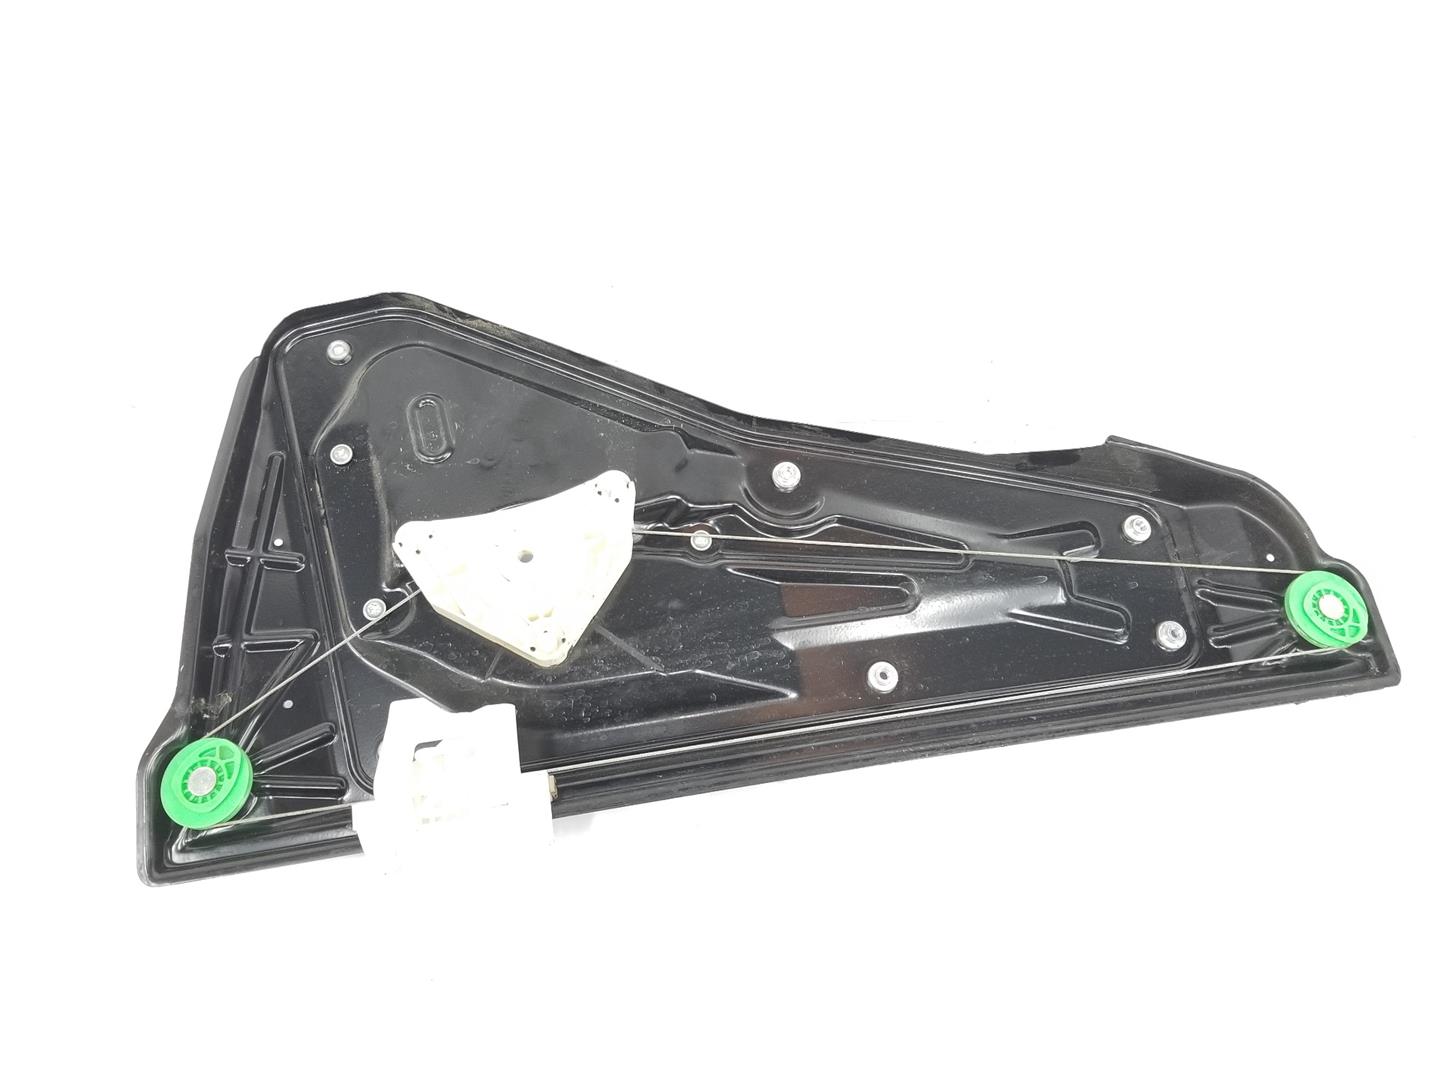 LAND ROVER Discovery 4 generation (2009-2016) Rear left door window lifter CVH500130, 4H2227001AB 19874990